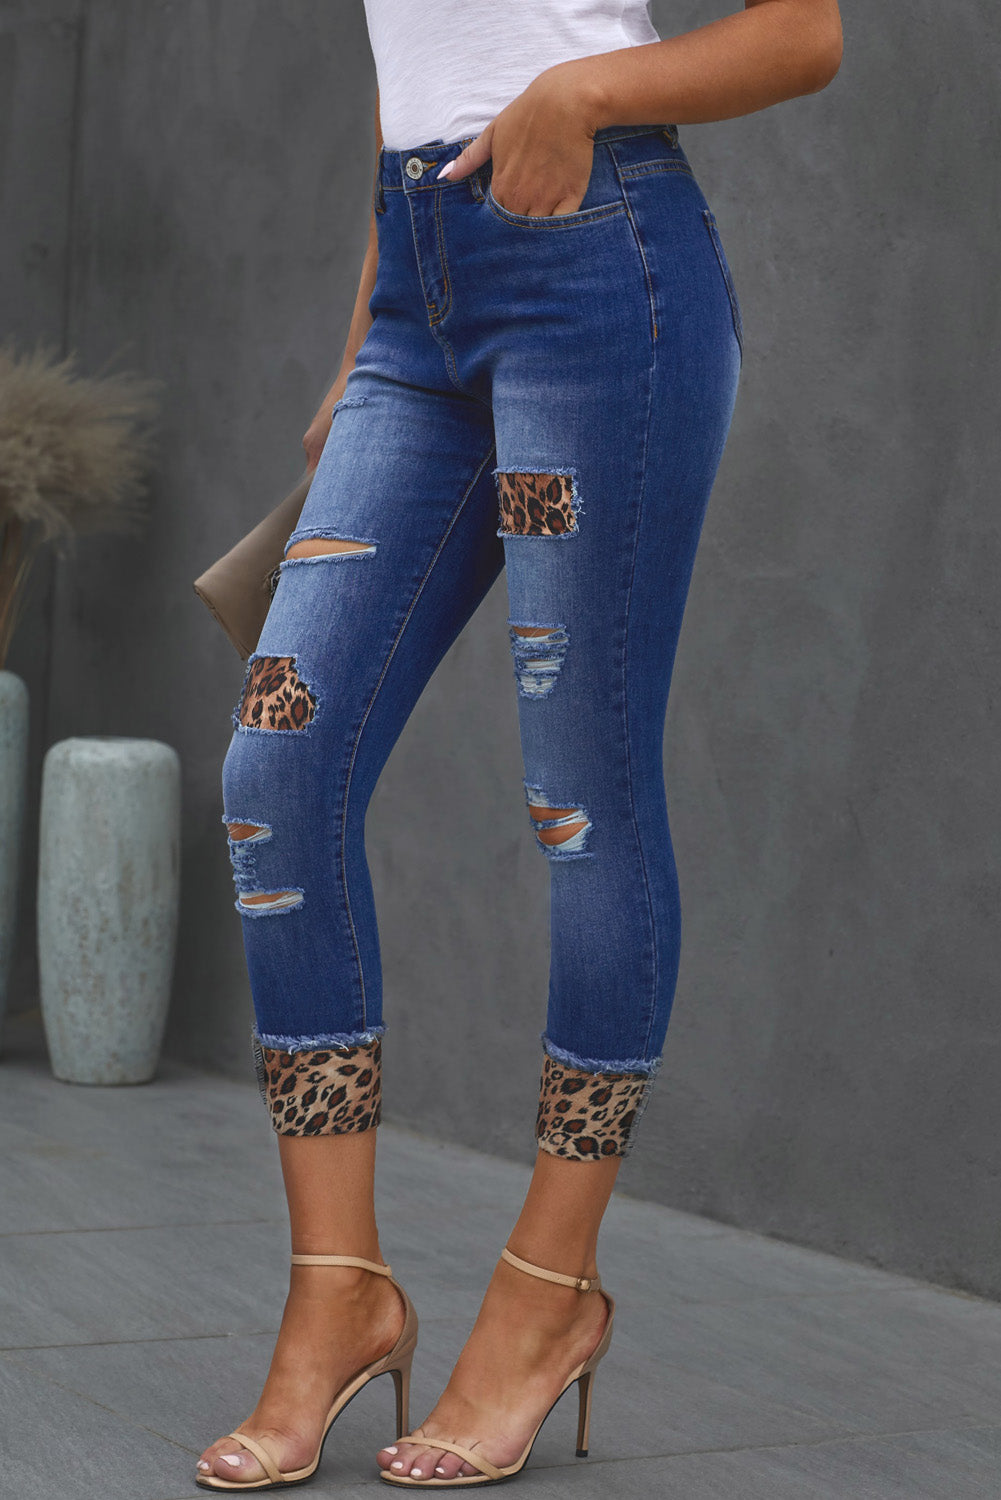 Left side view of model wearing Leopard Print Denim. These jeans are cropped and distressed.